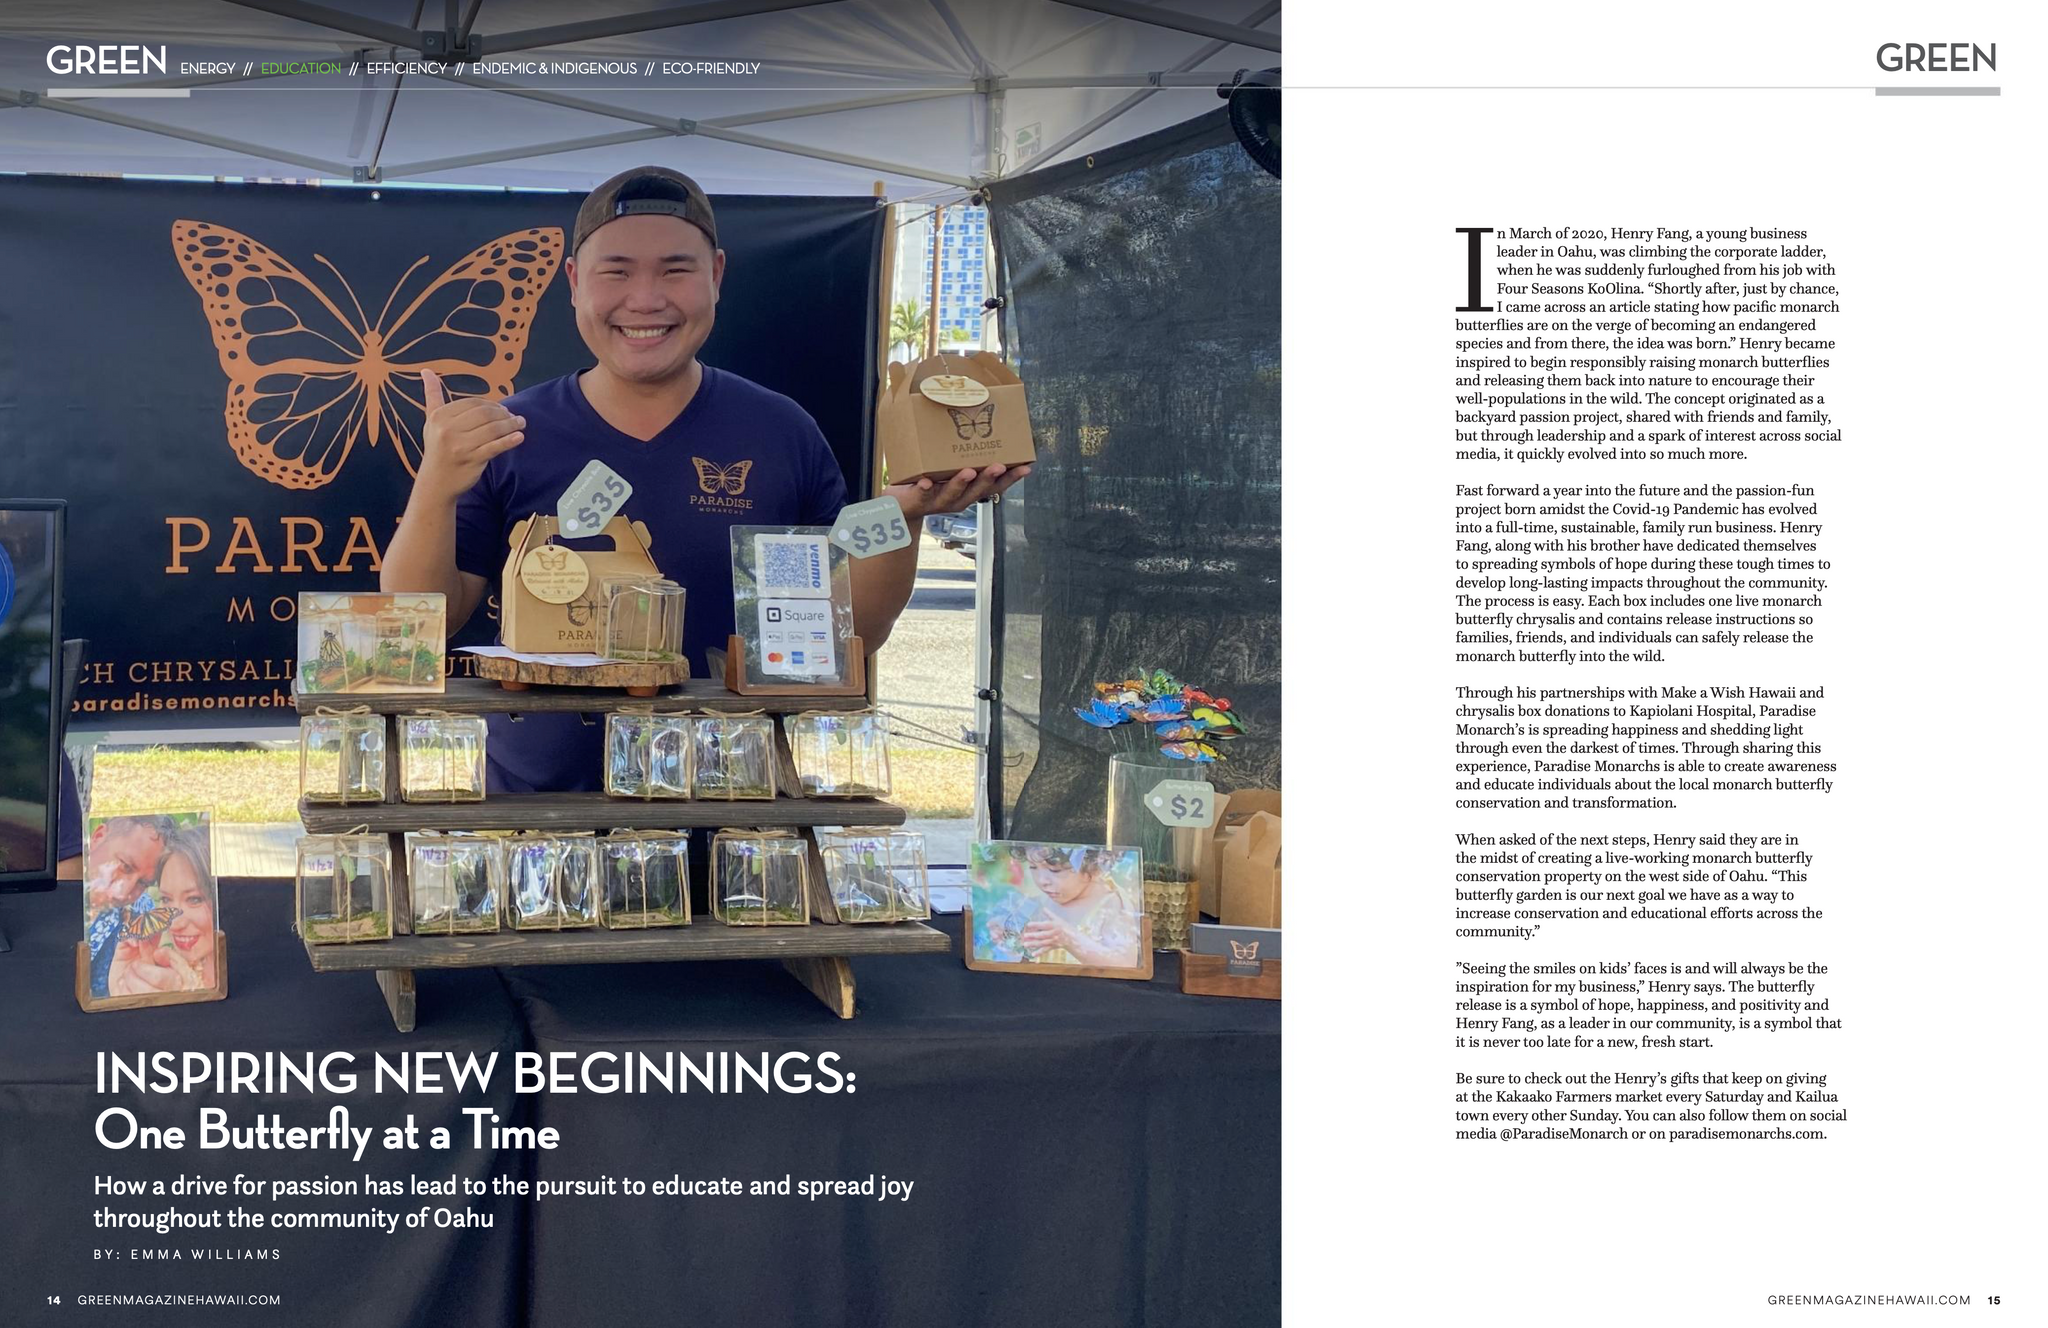 Paradise monarchs featuring Henry Fang, owner inside Hawaii green magazine. Inspiring new beginnings: one butterfly at a time. 